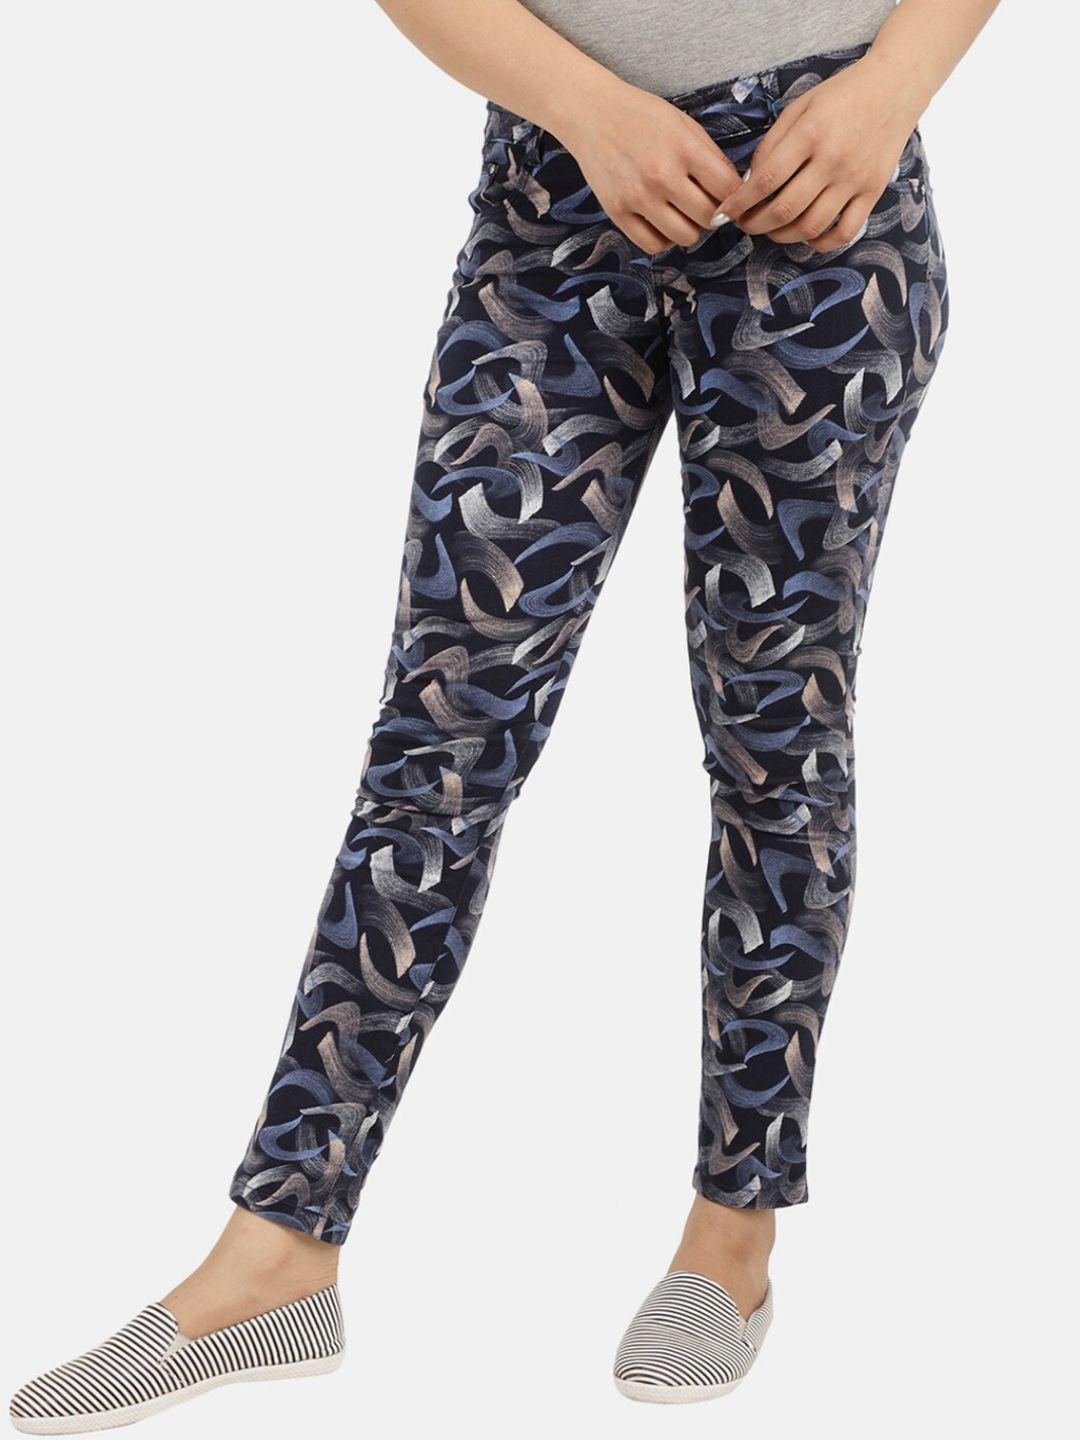 v-mart women navy blue camouflage printed chinos trousers